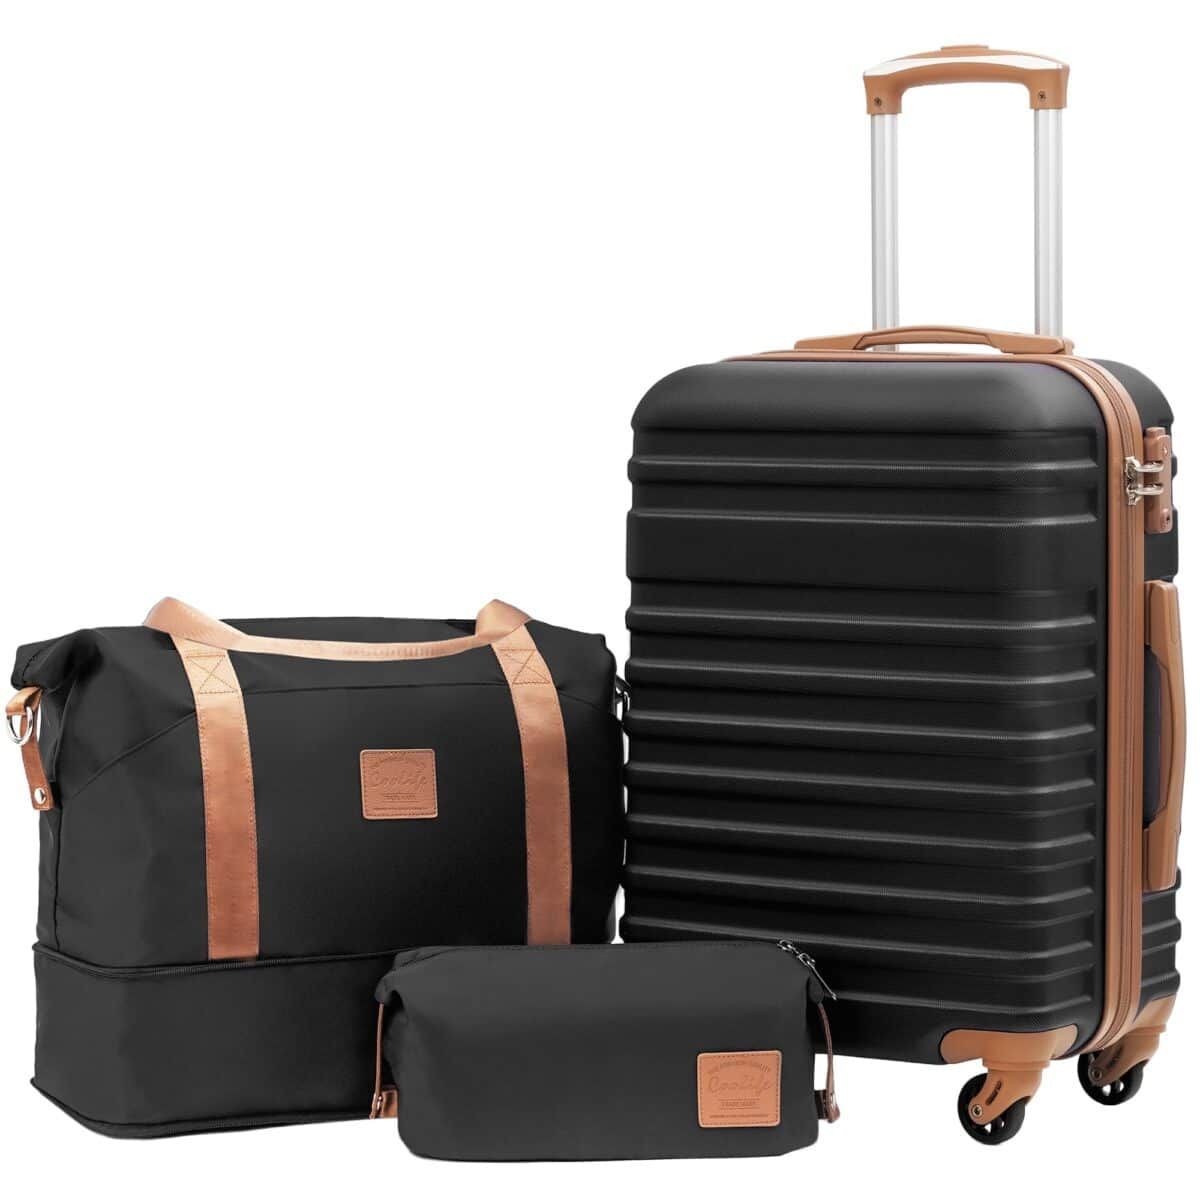  Coolife Luggage Reviews  : The Ultimate Guide to Stylish and Durable Travel Gear